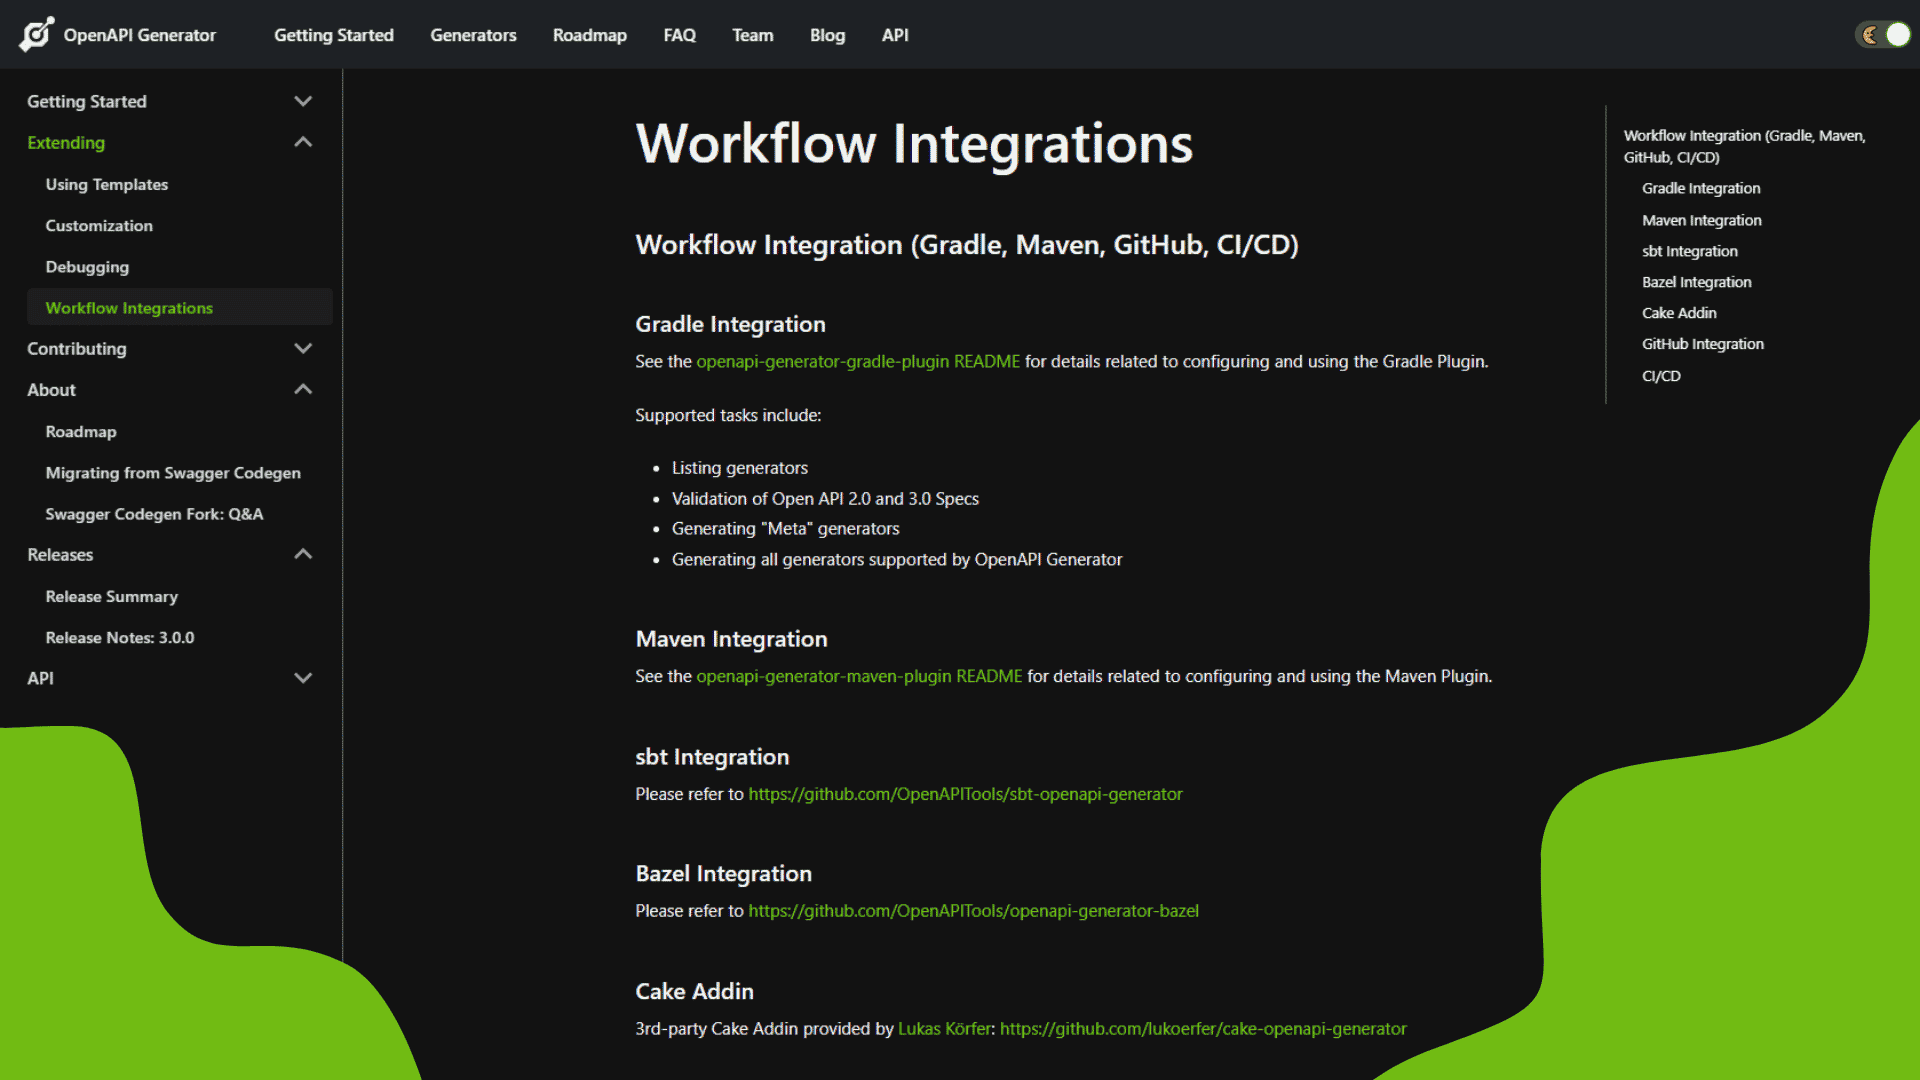 Key Features - Workflow Integration